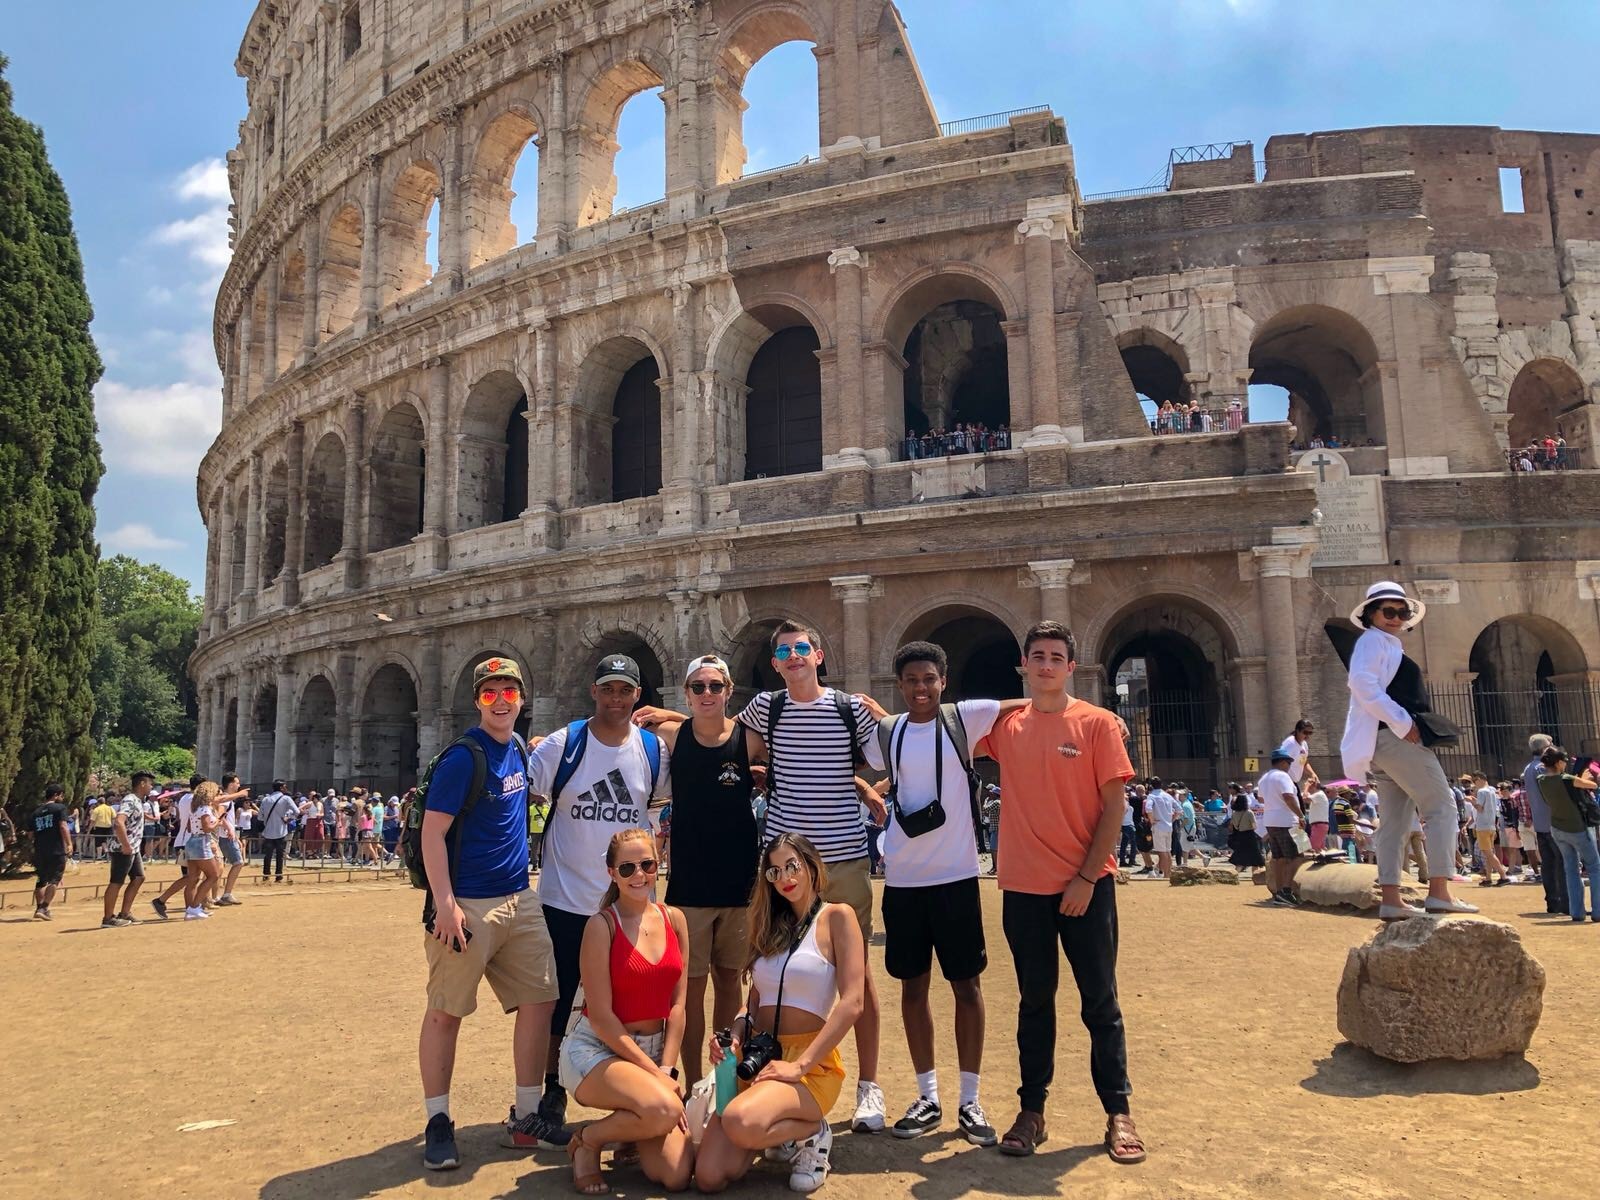 Study food culture in Italy, learn how to make traditional Italian dishes, take in the historic sites of Rome, and wander along the canals of Venice. Receive language and culinary training from renowned institutions. Summer study abroad in Italy, students in front of the Colosseum